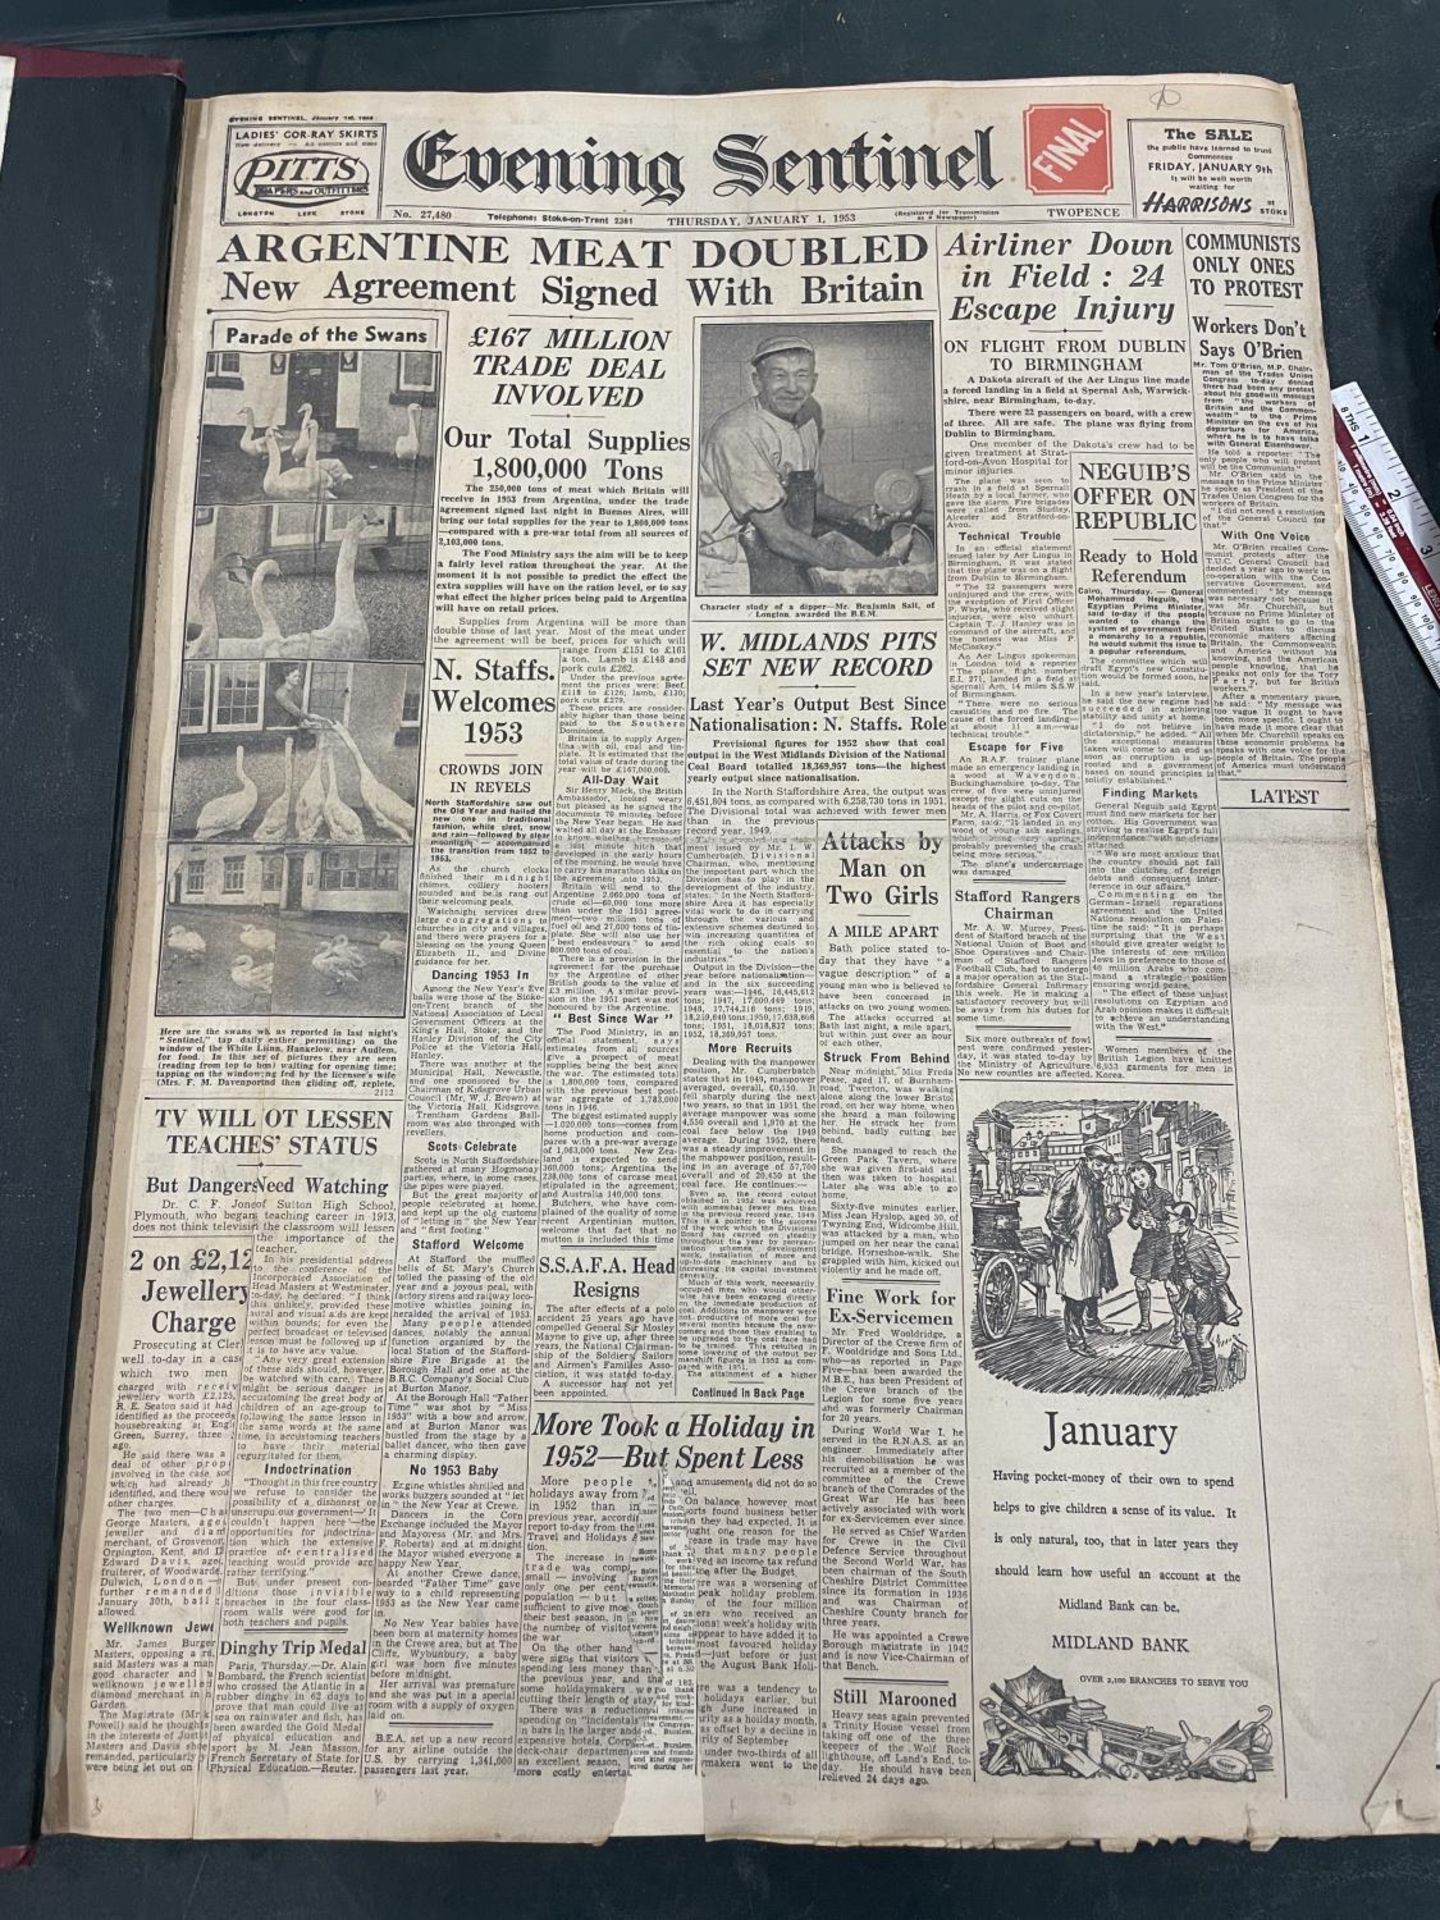 A LARGE BOOK CONTAINING ALL EDITIONS OF THE EVENING SENTINEL JAN 1 - 31 1953 - Image 3 of 8